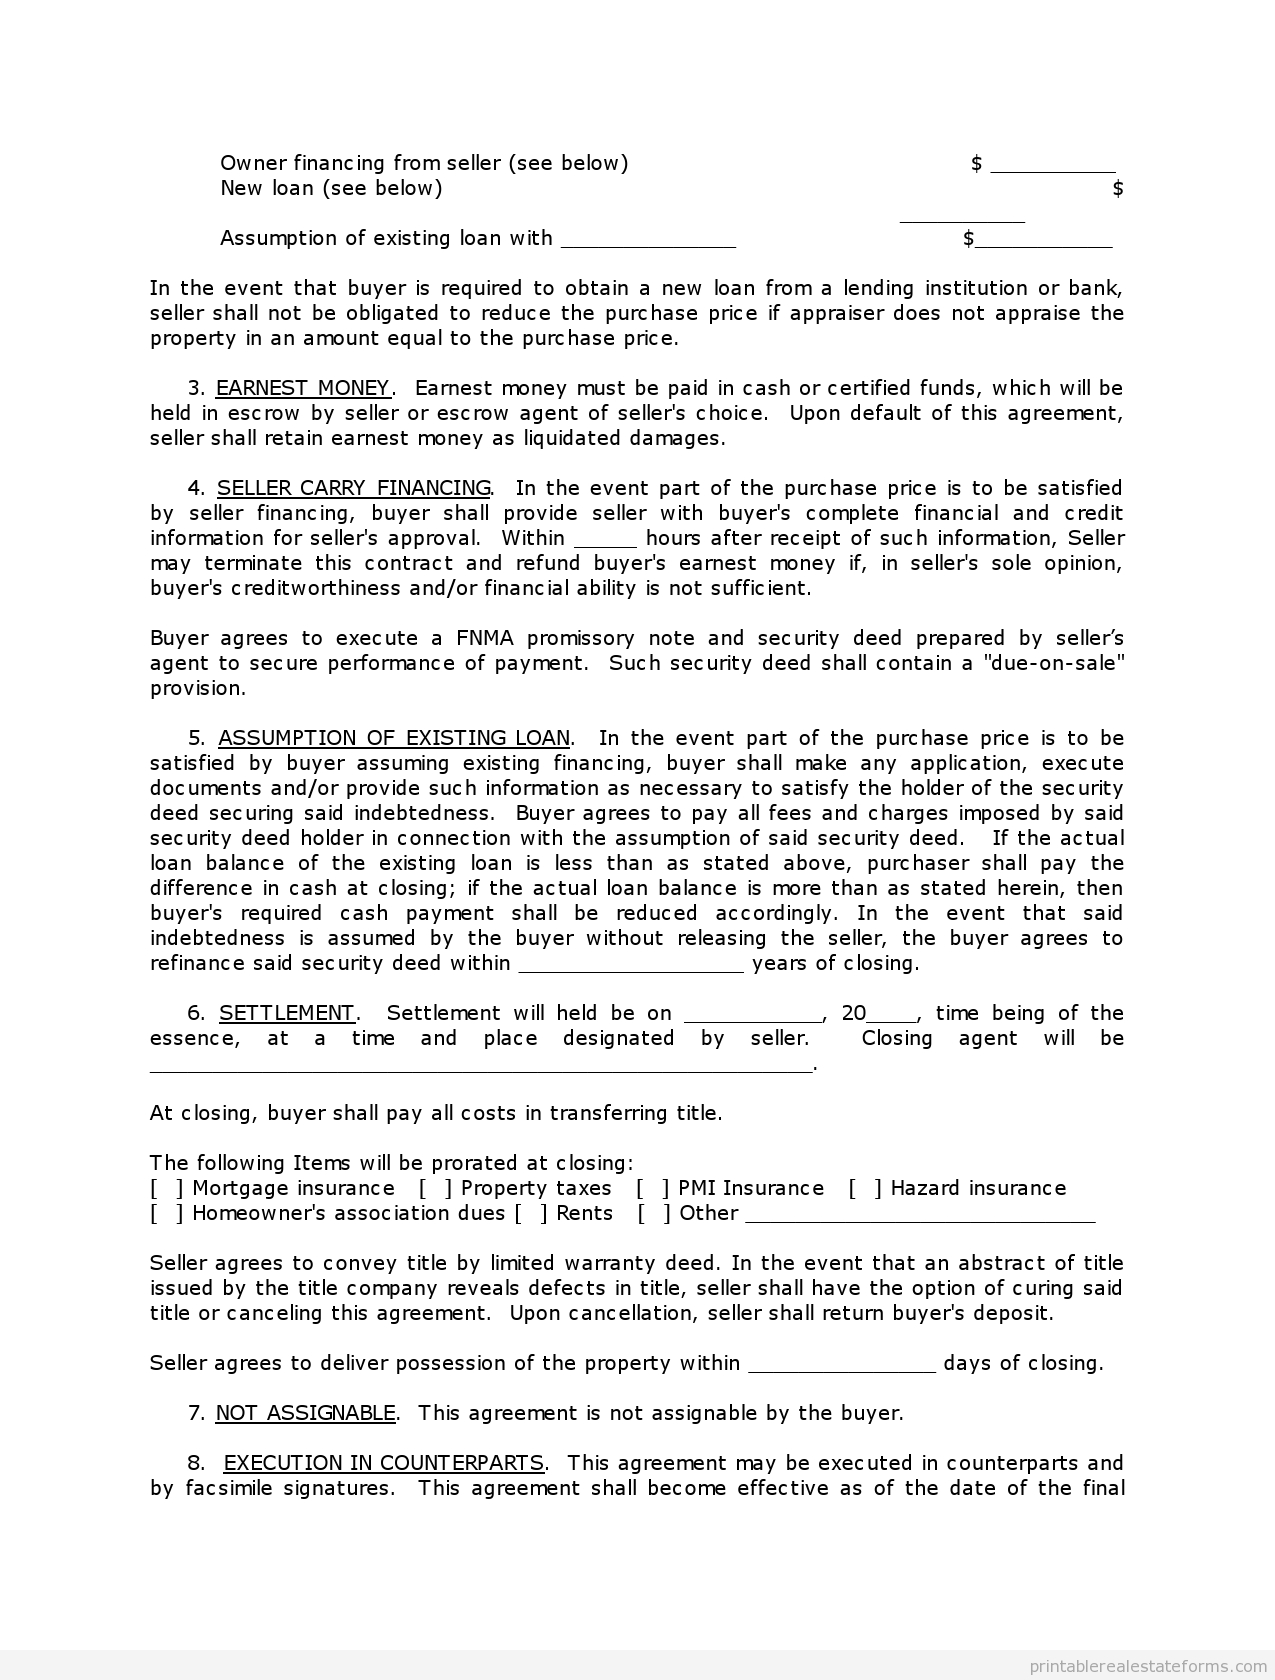 Free Contract To Sell On Land Contract Form | Printable Real Estate Forms in Land Sale Contract Template